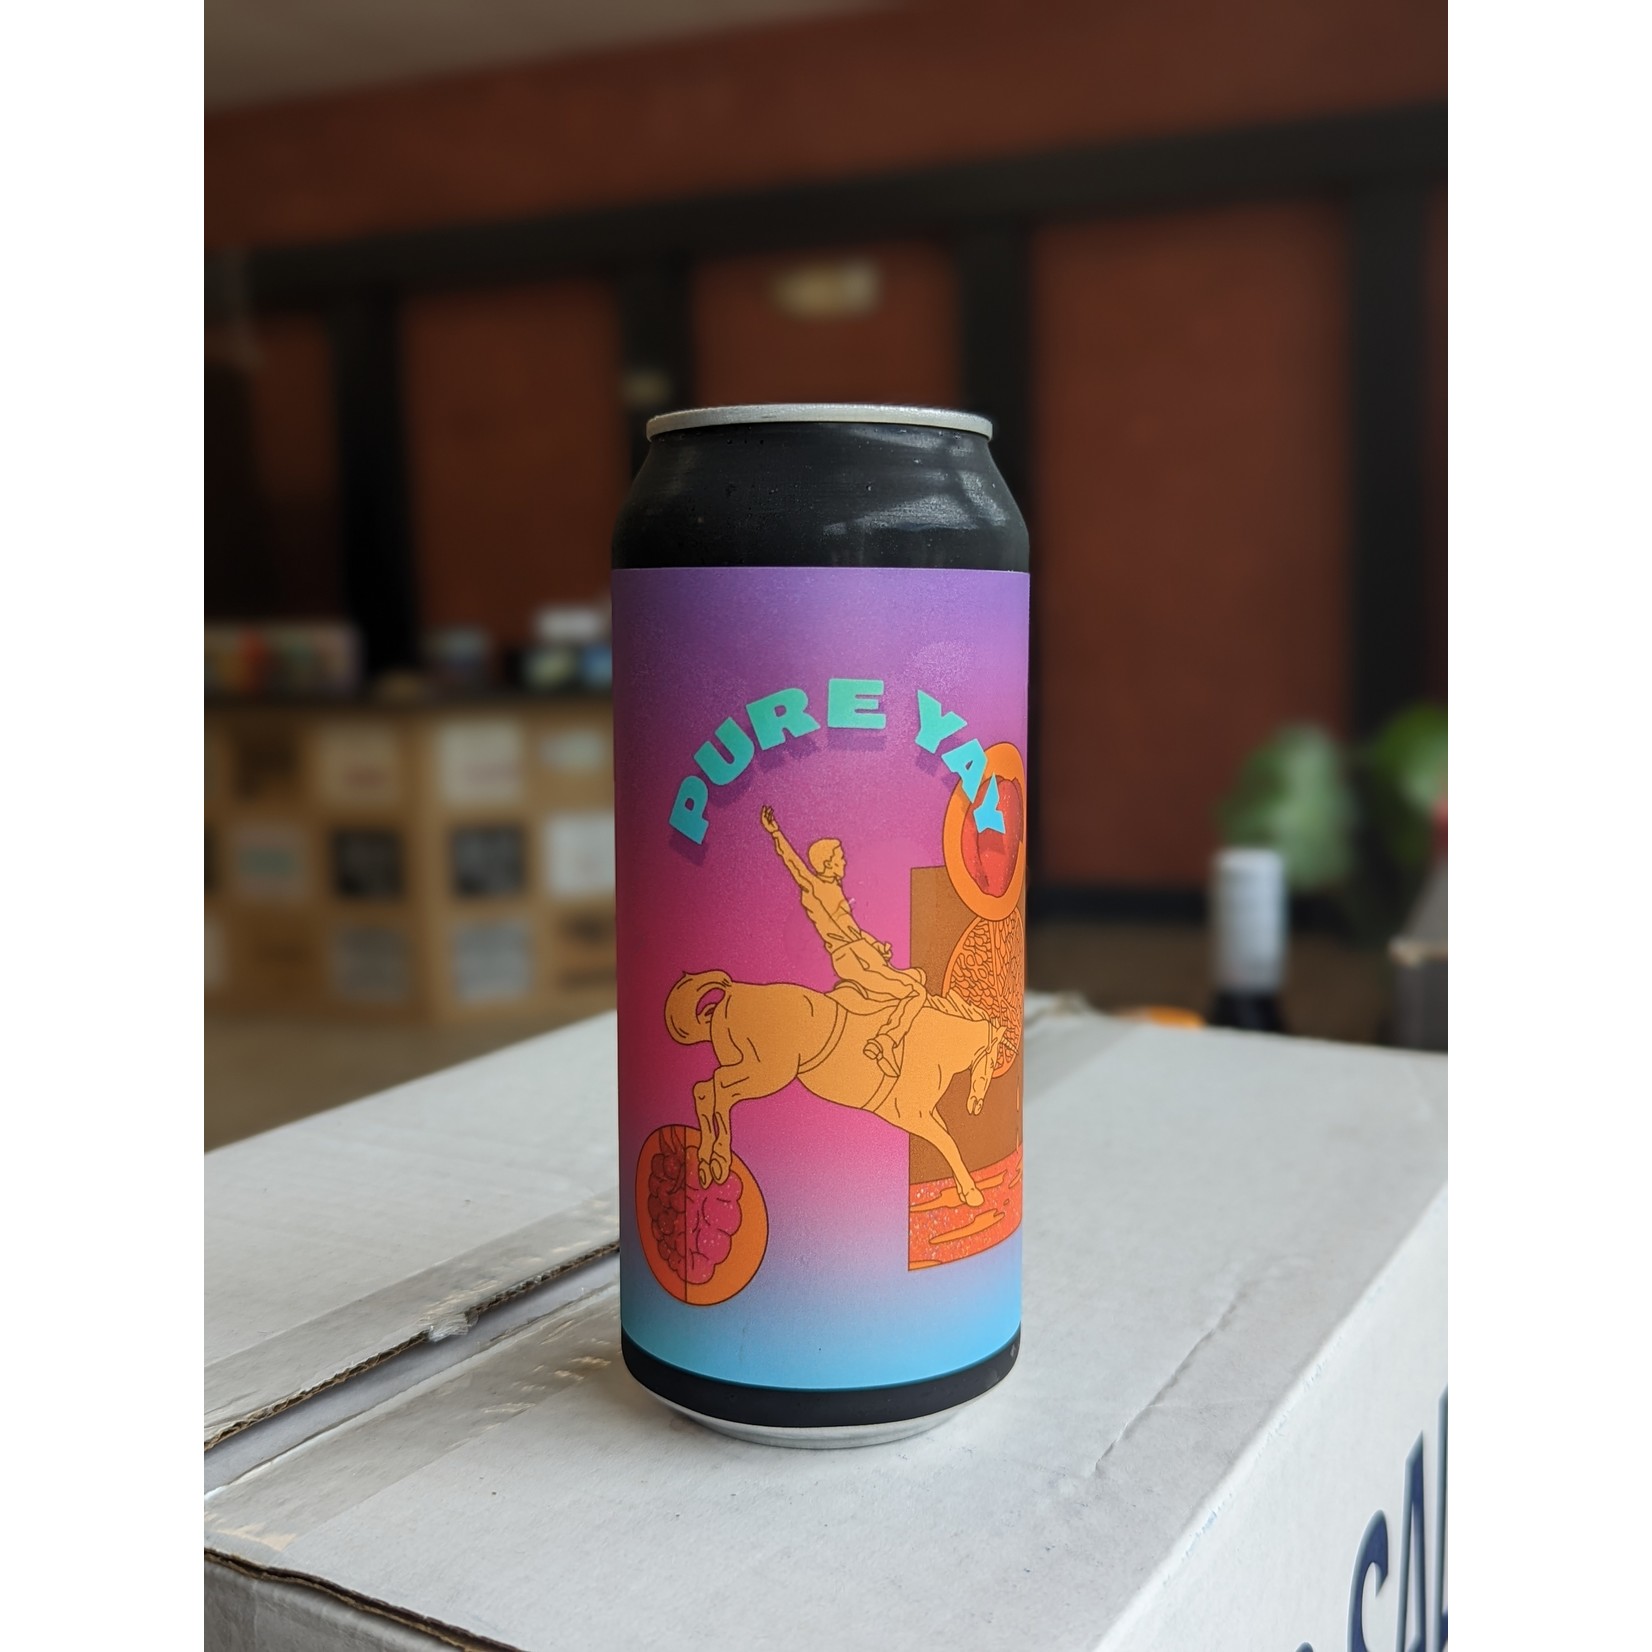 Eagle Park "Pure Yay" Fruited Sour CAN